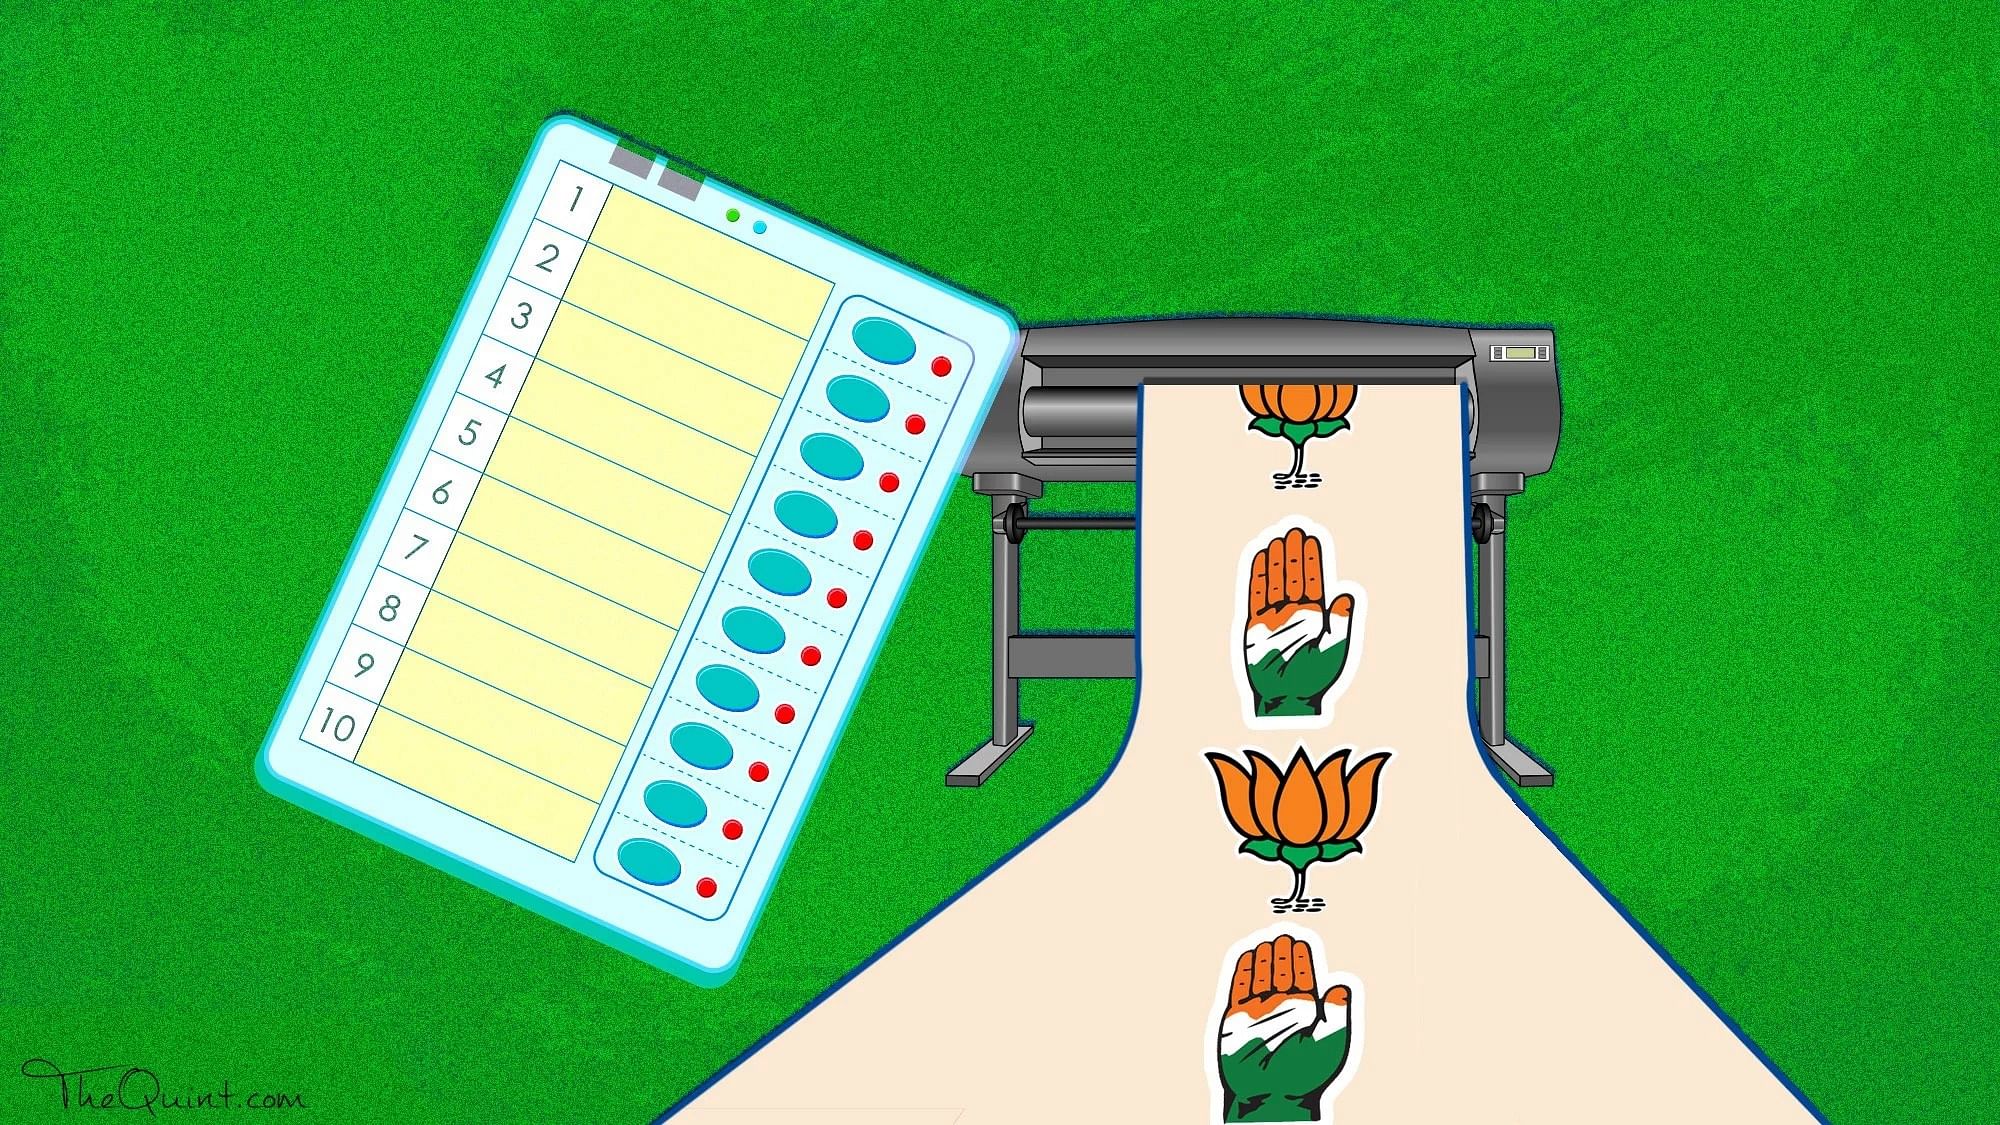 Phase I of Gujarat elections was marred by allegations of faulty EVMs and EVM tampering via Bluetooth.